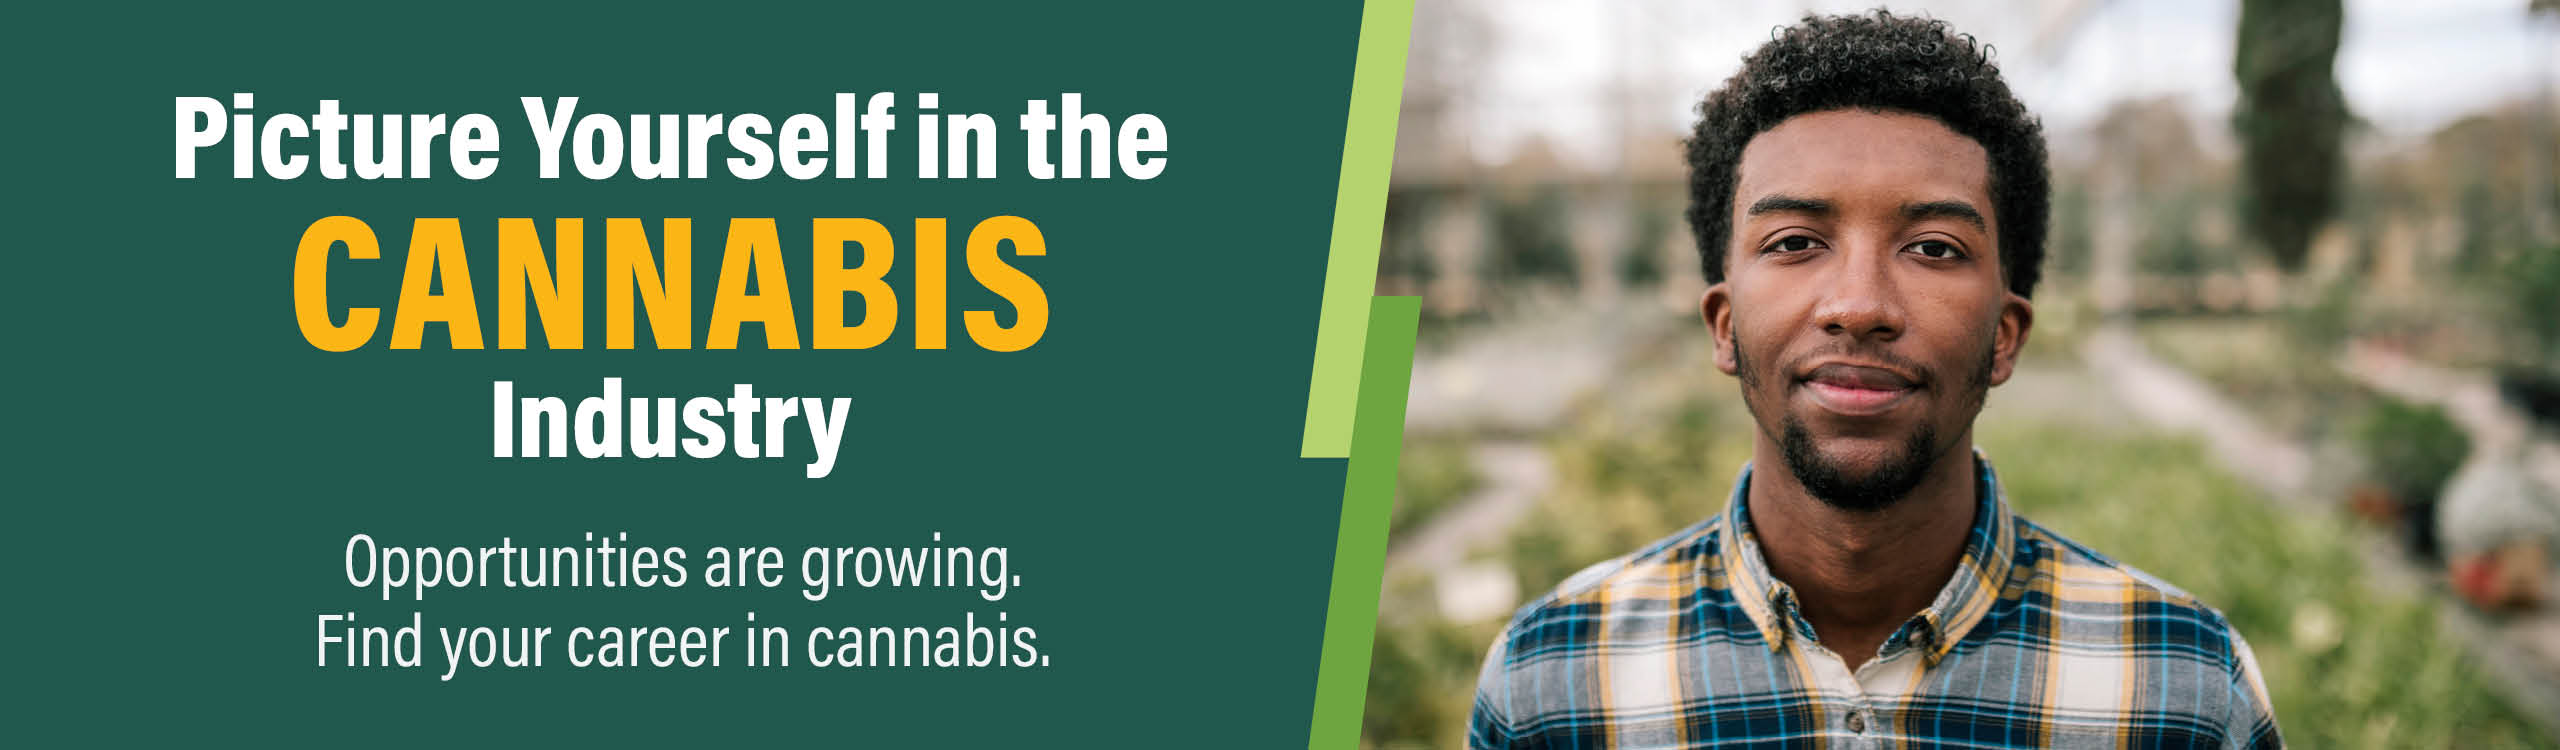 Picture Yourself in the Cannabis Industry. Opportunities are growing. Find your career in cannabis.